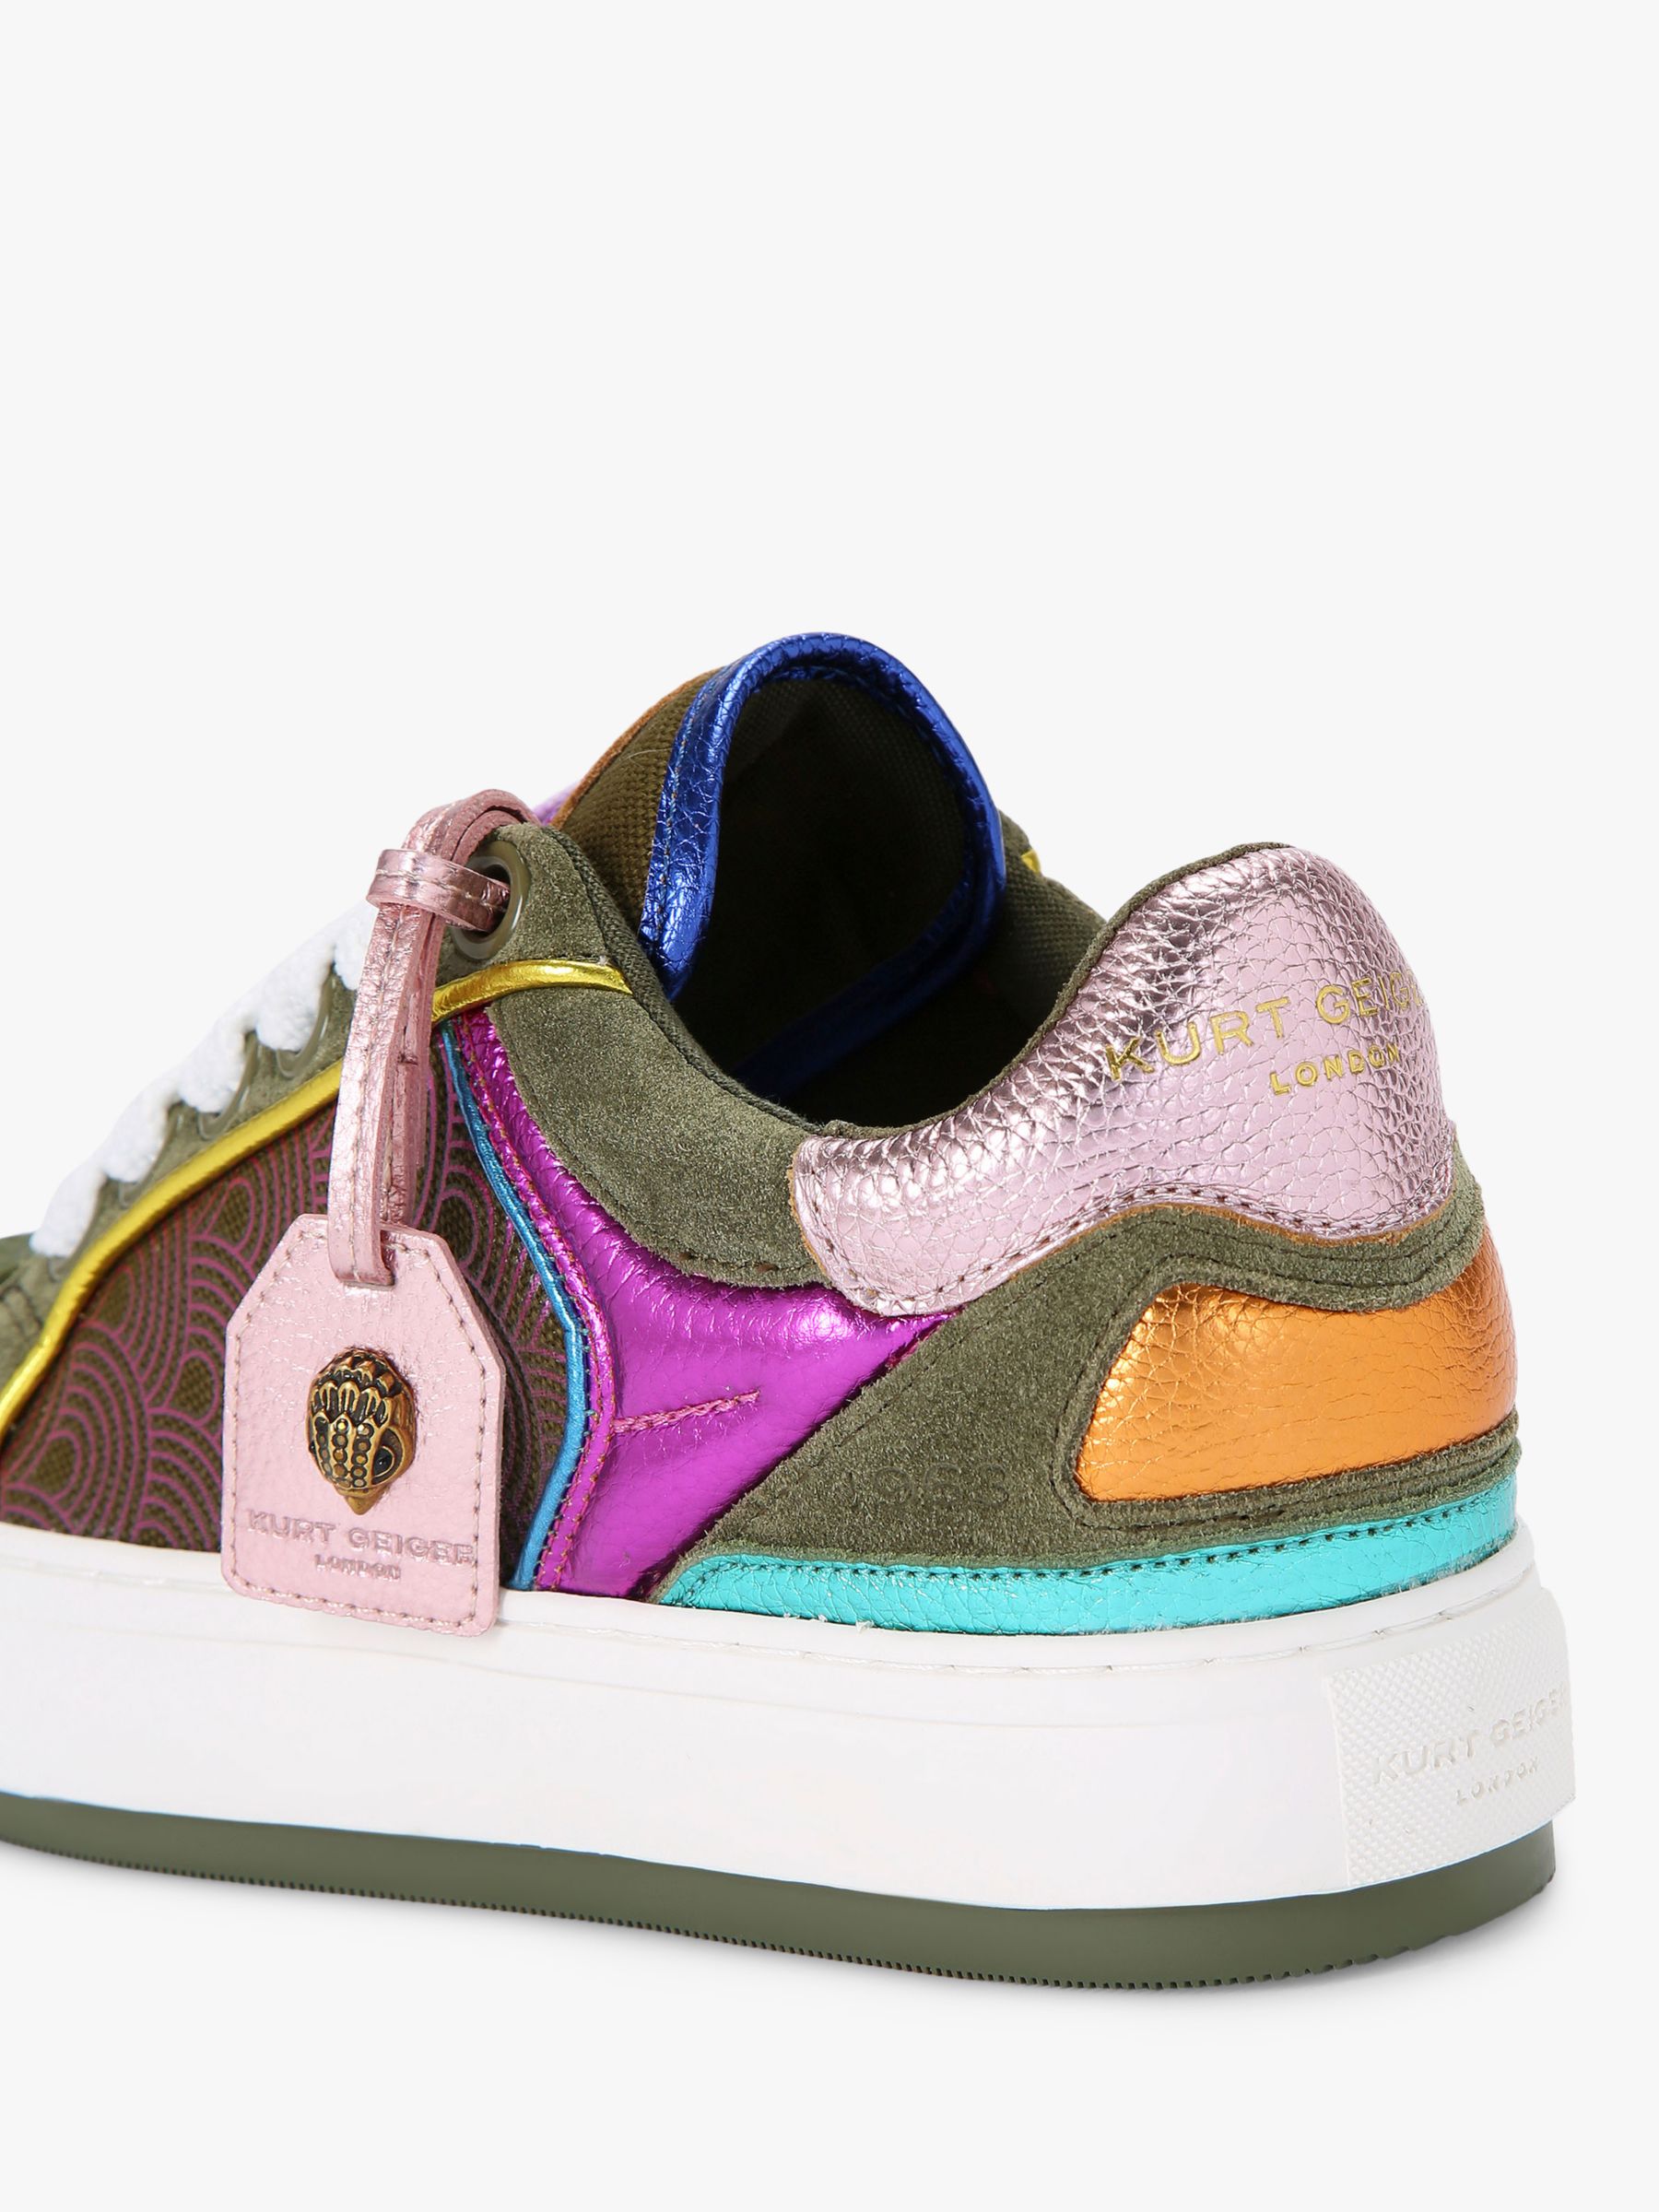 Buy Kurt Geiger London Southbank Tag Leather Trainers Online at johnlewis.com